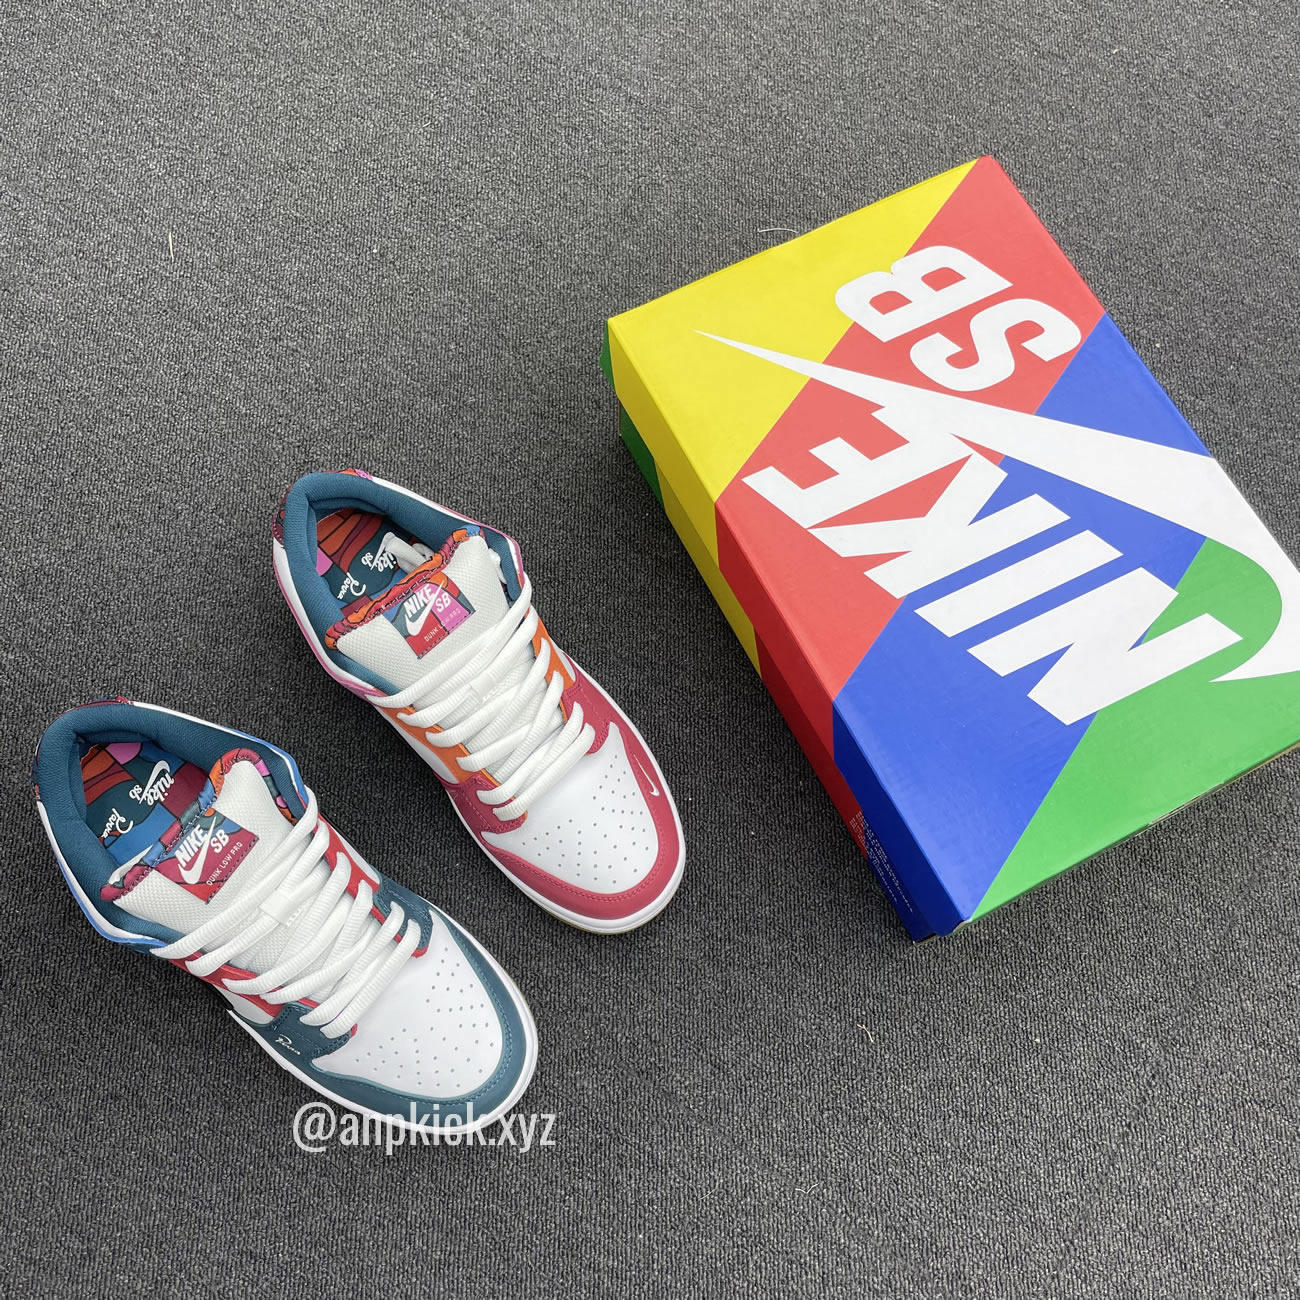 Parra Nike Sb Dunk Low Collab Summer 2021 Colorway Surfaces Dh7695 100 (2) - newkick.org